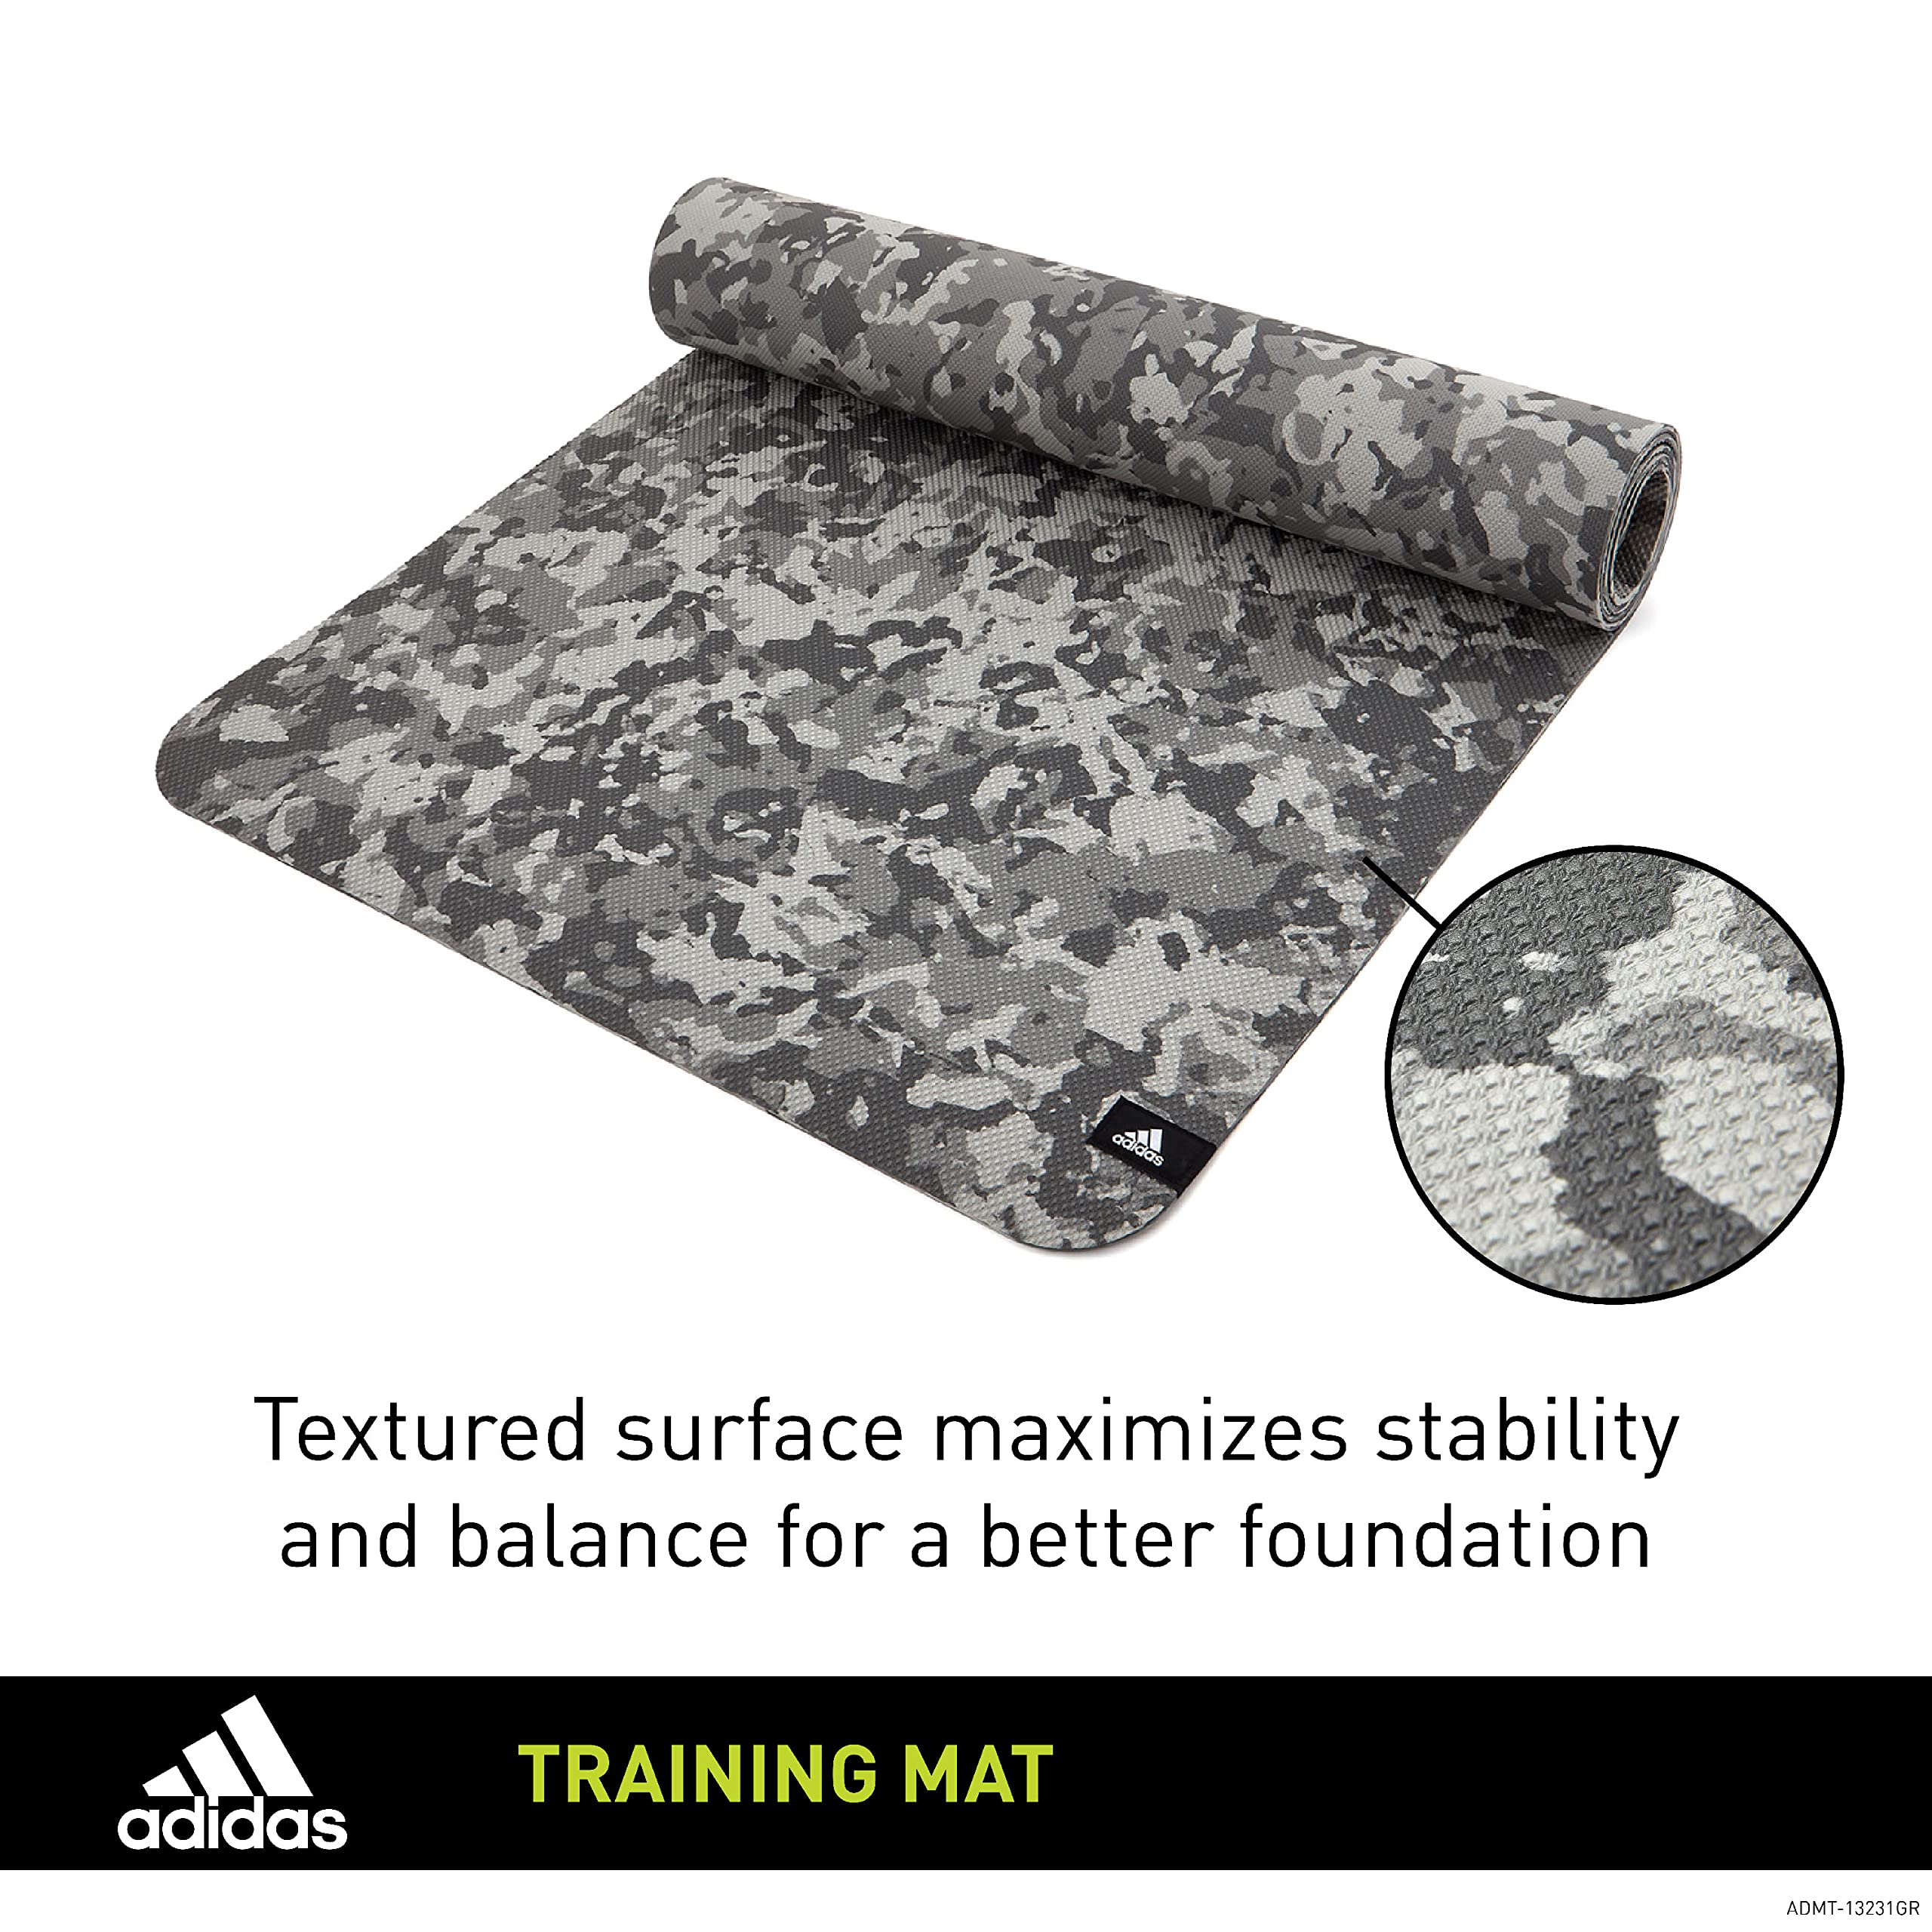 adidas 4mm Thick Textured Training Mat - Grip Texture for Support and Stability - Lightweight Non-Slip Workout Mat for Home Gym, Floor Workouts, and General Fitness - Portable and Durable - Grey Camo